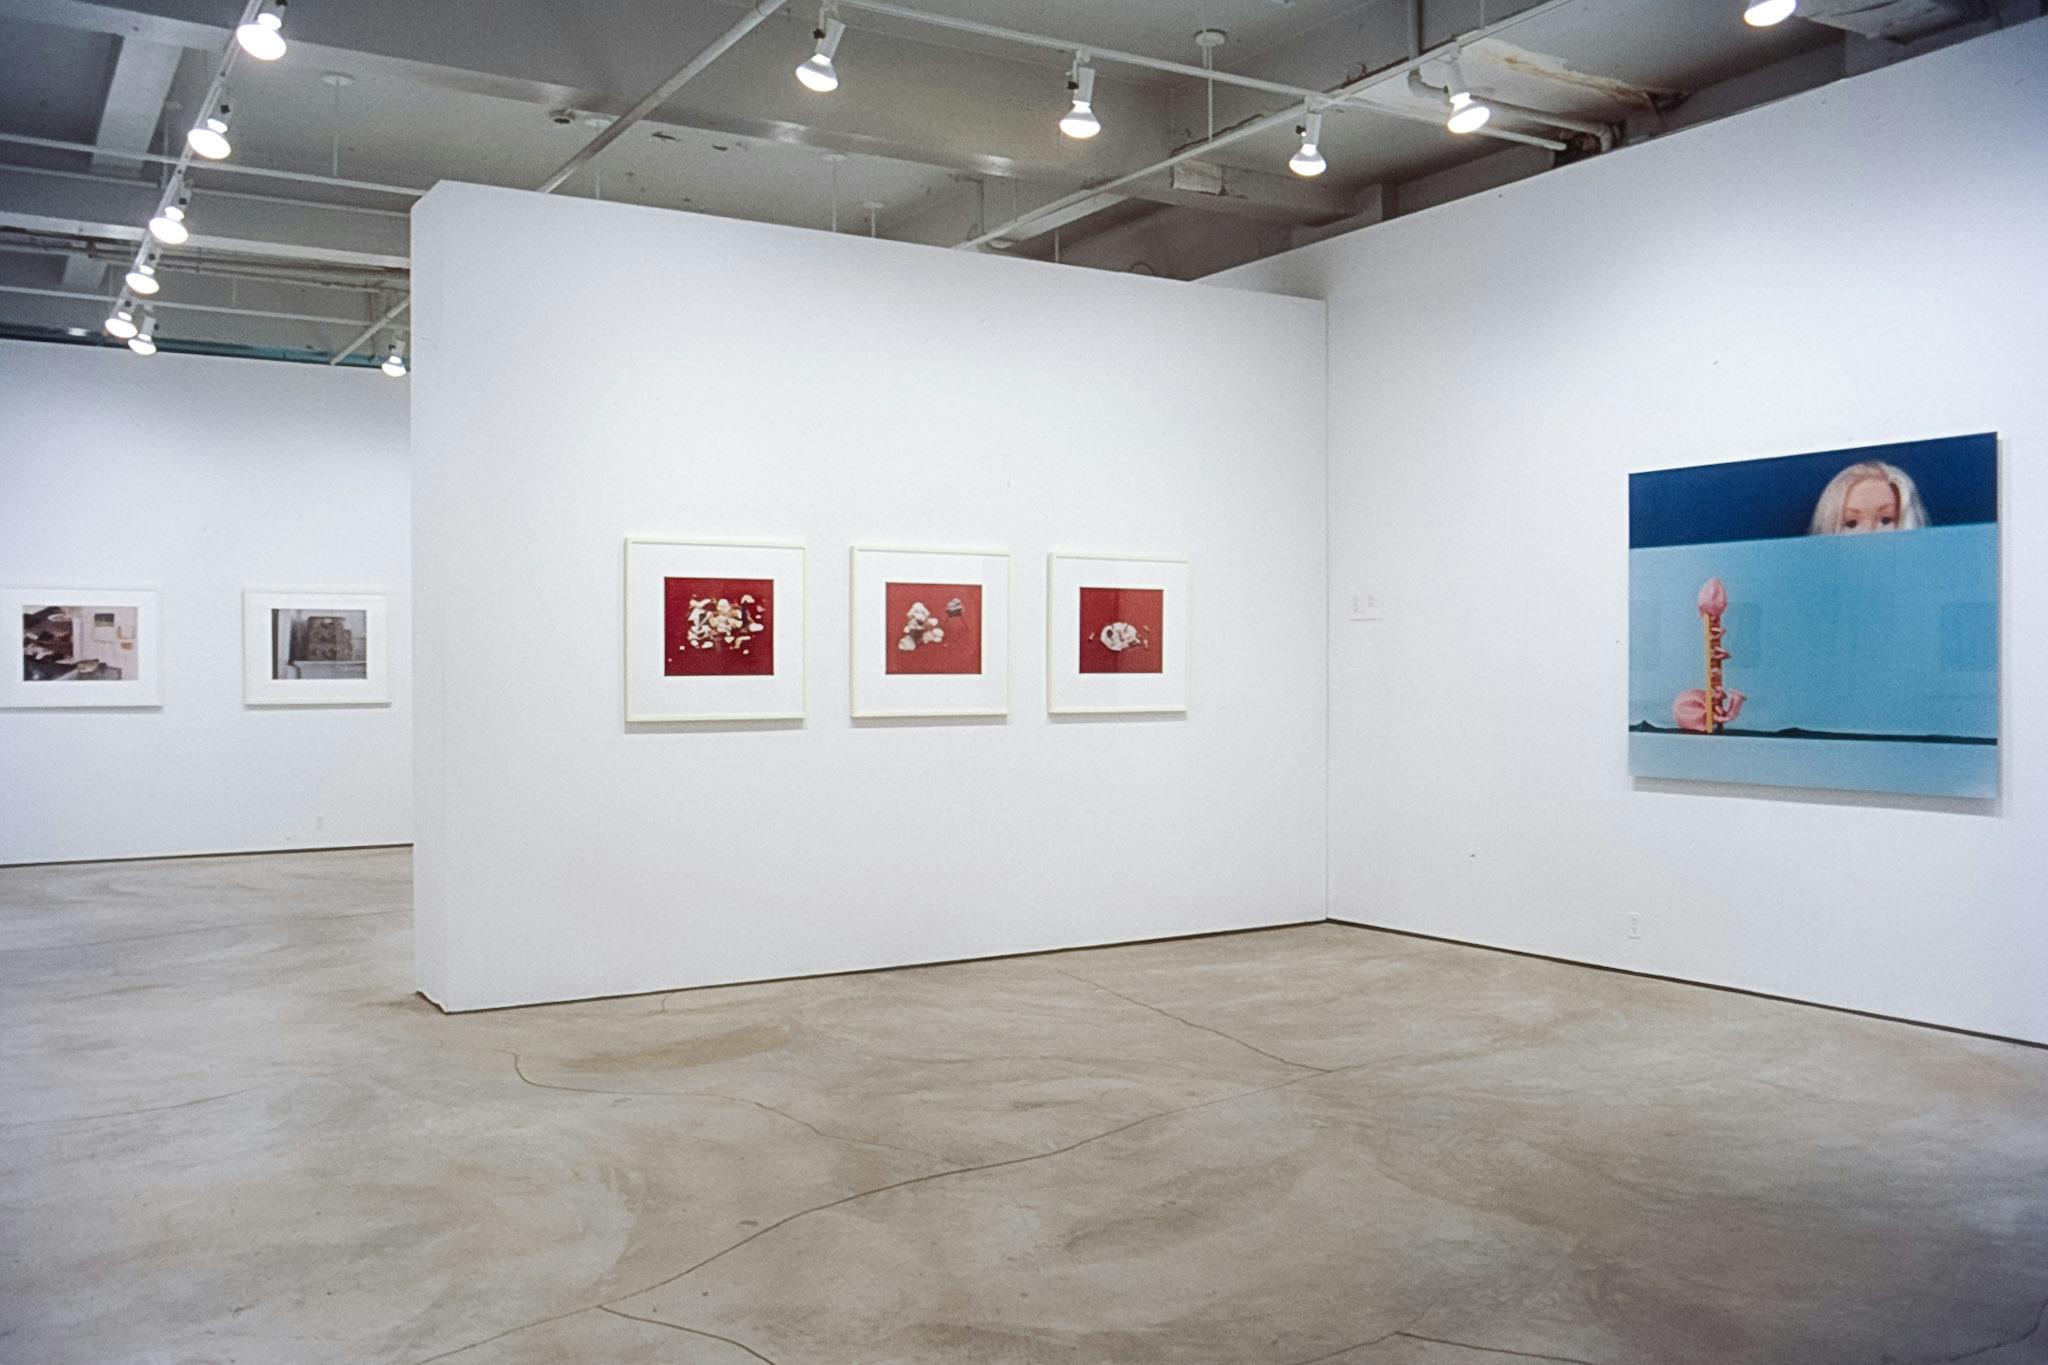 Six artworks are installed on the gallery walls. Three of them show white organic shapes assembled in the red background. The large piece on the front wall shows a girl behind a pink floral sculpture. 